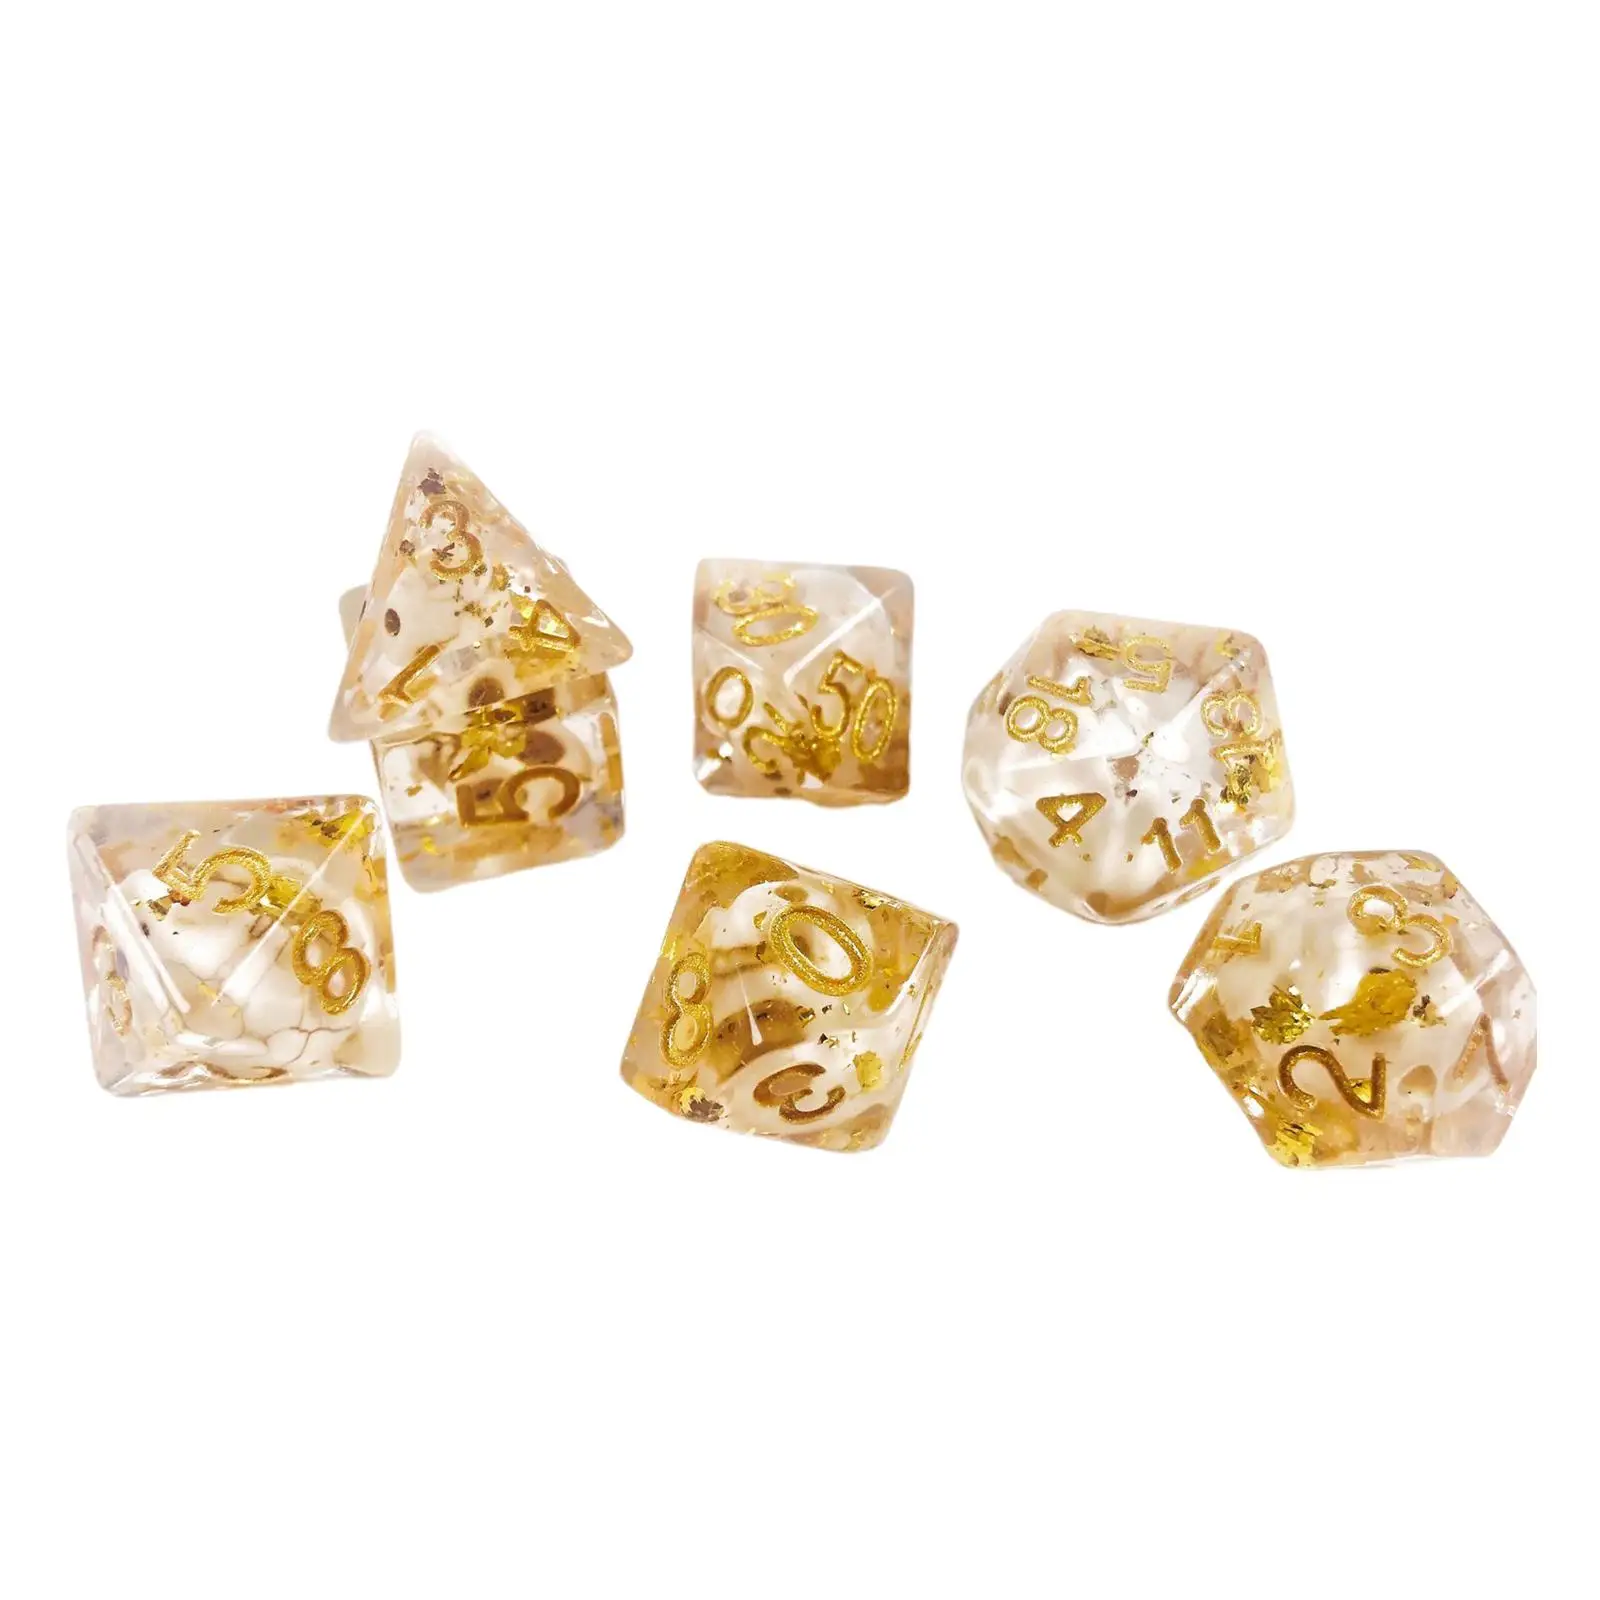 7 Pieces Polyhedral Dicess Set Built in Skull for Tabletop Game Math Game Role Play